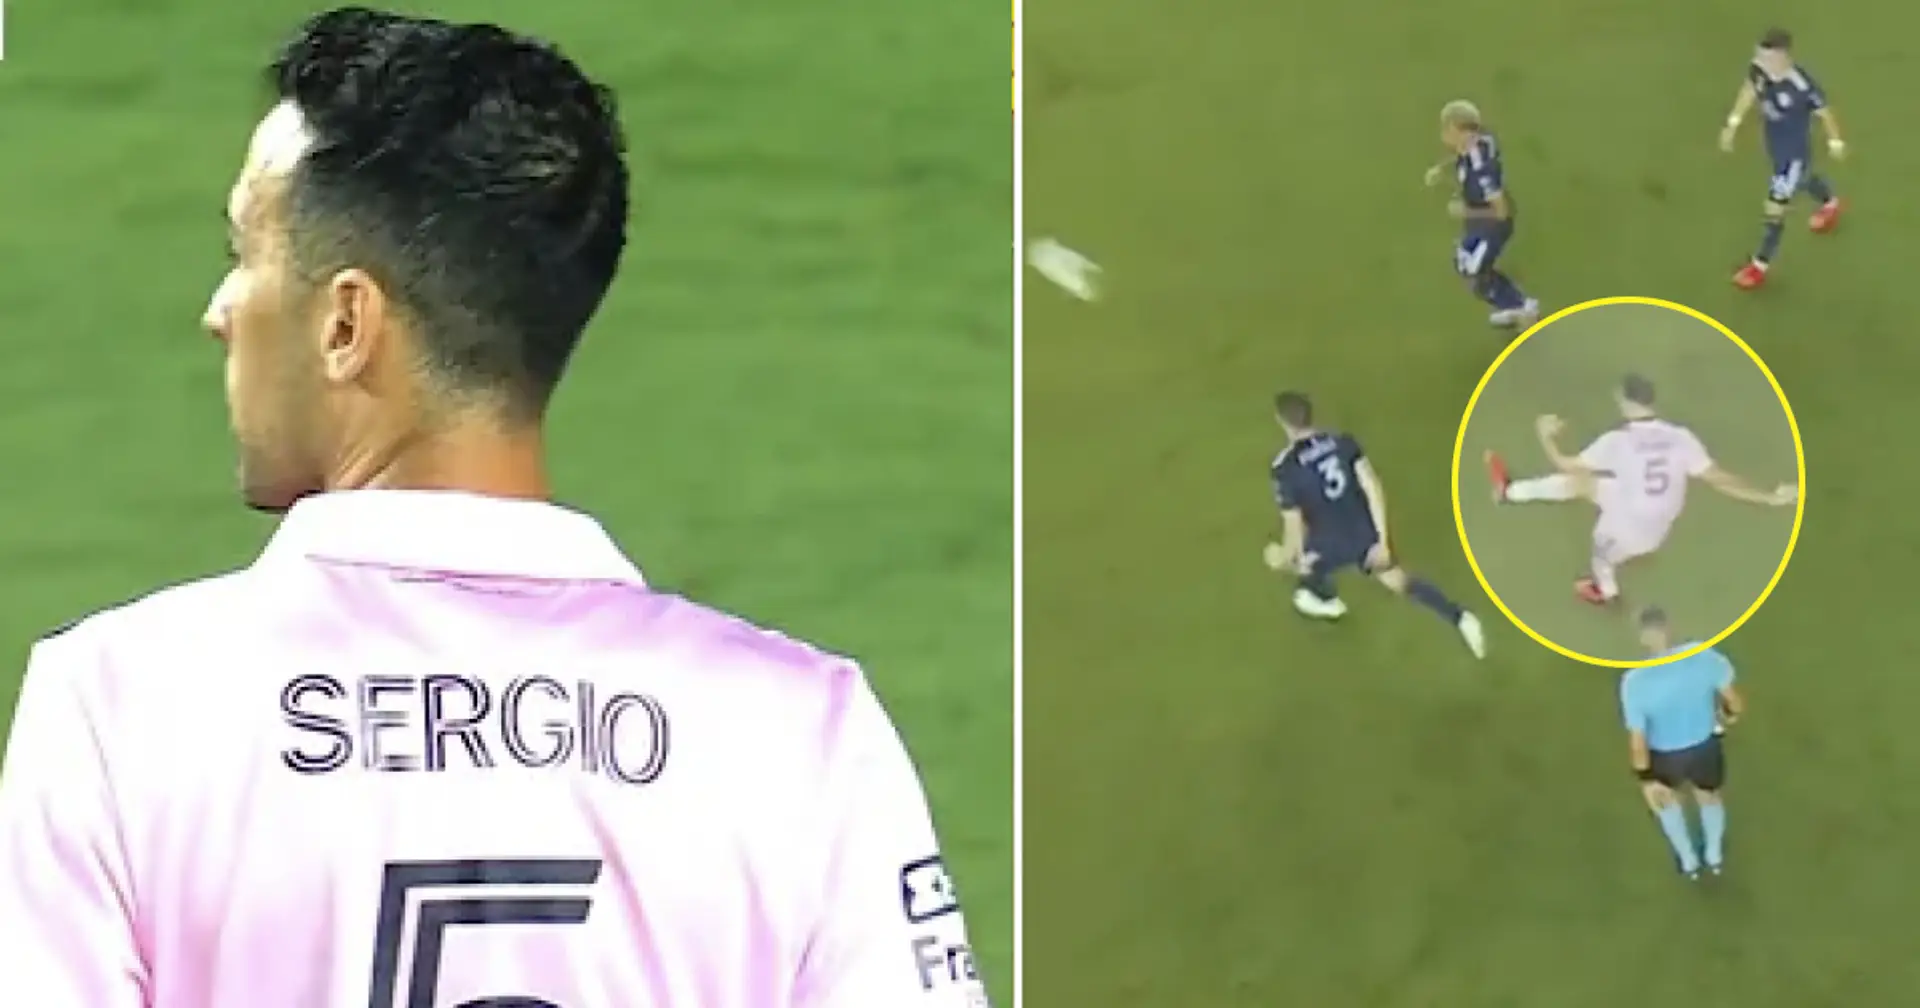 Sergio Busquets sets Inter Miami teammate up for winning goal with GENIUS pass - spotted